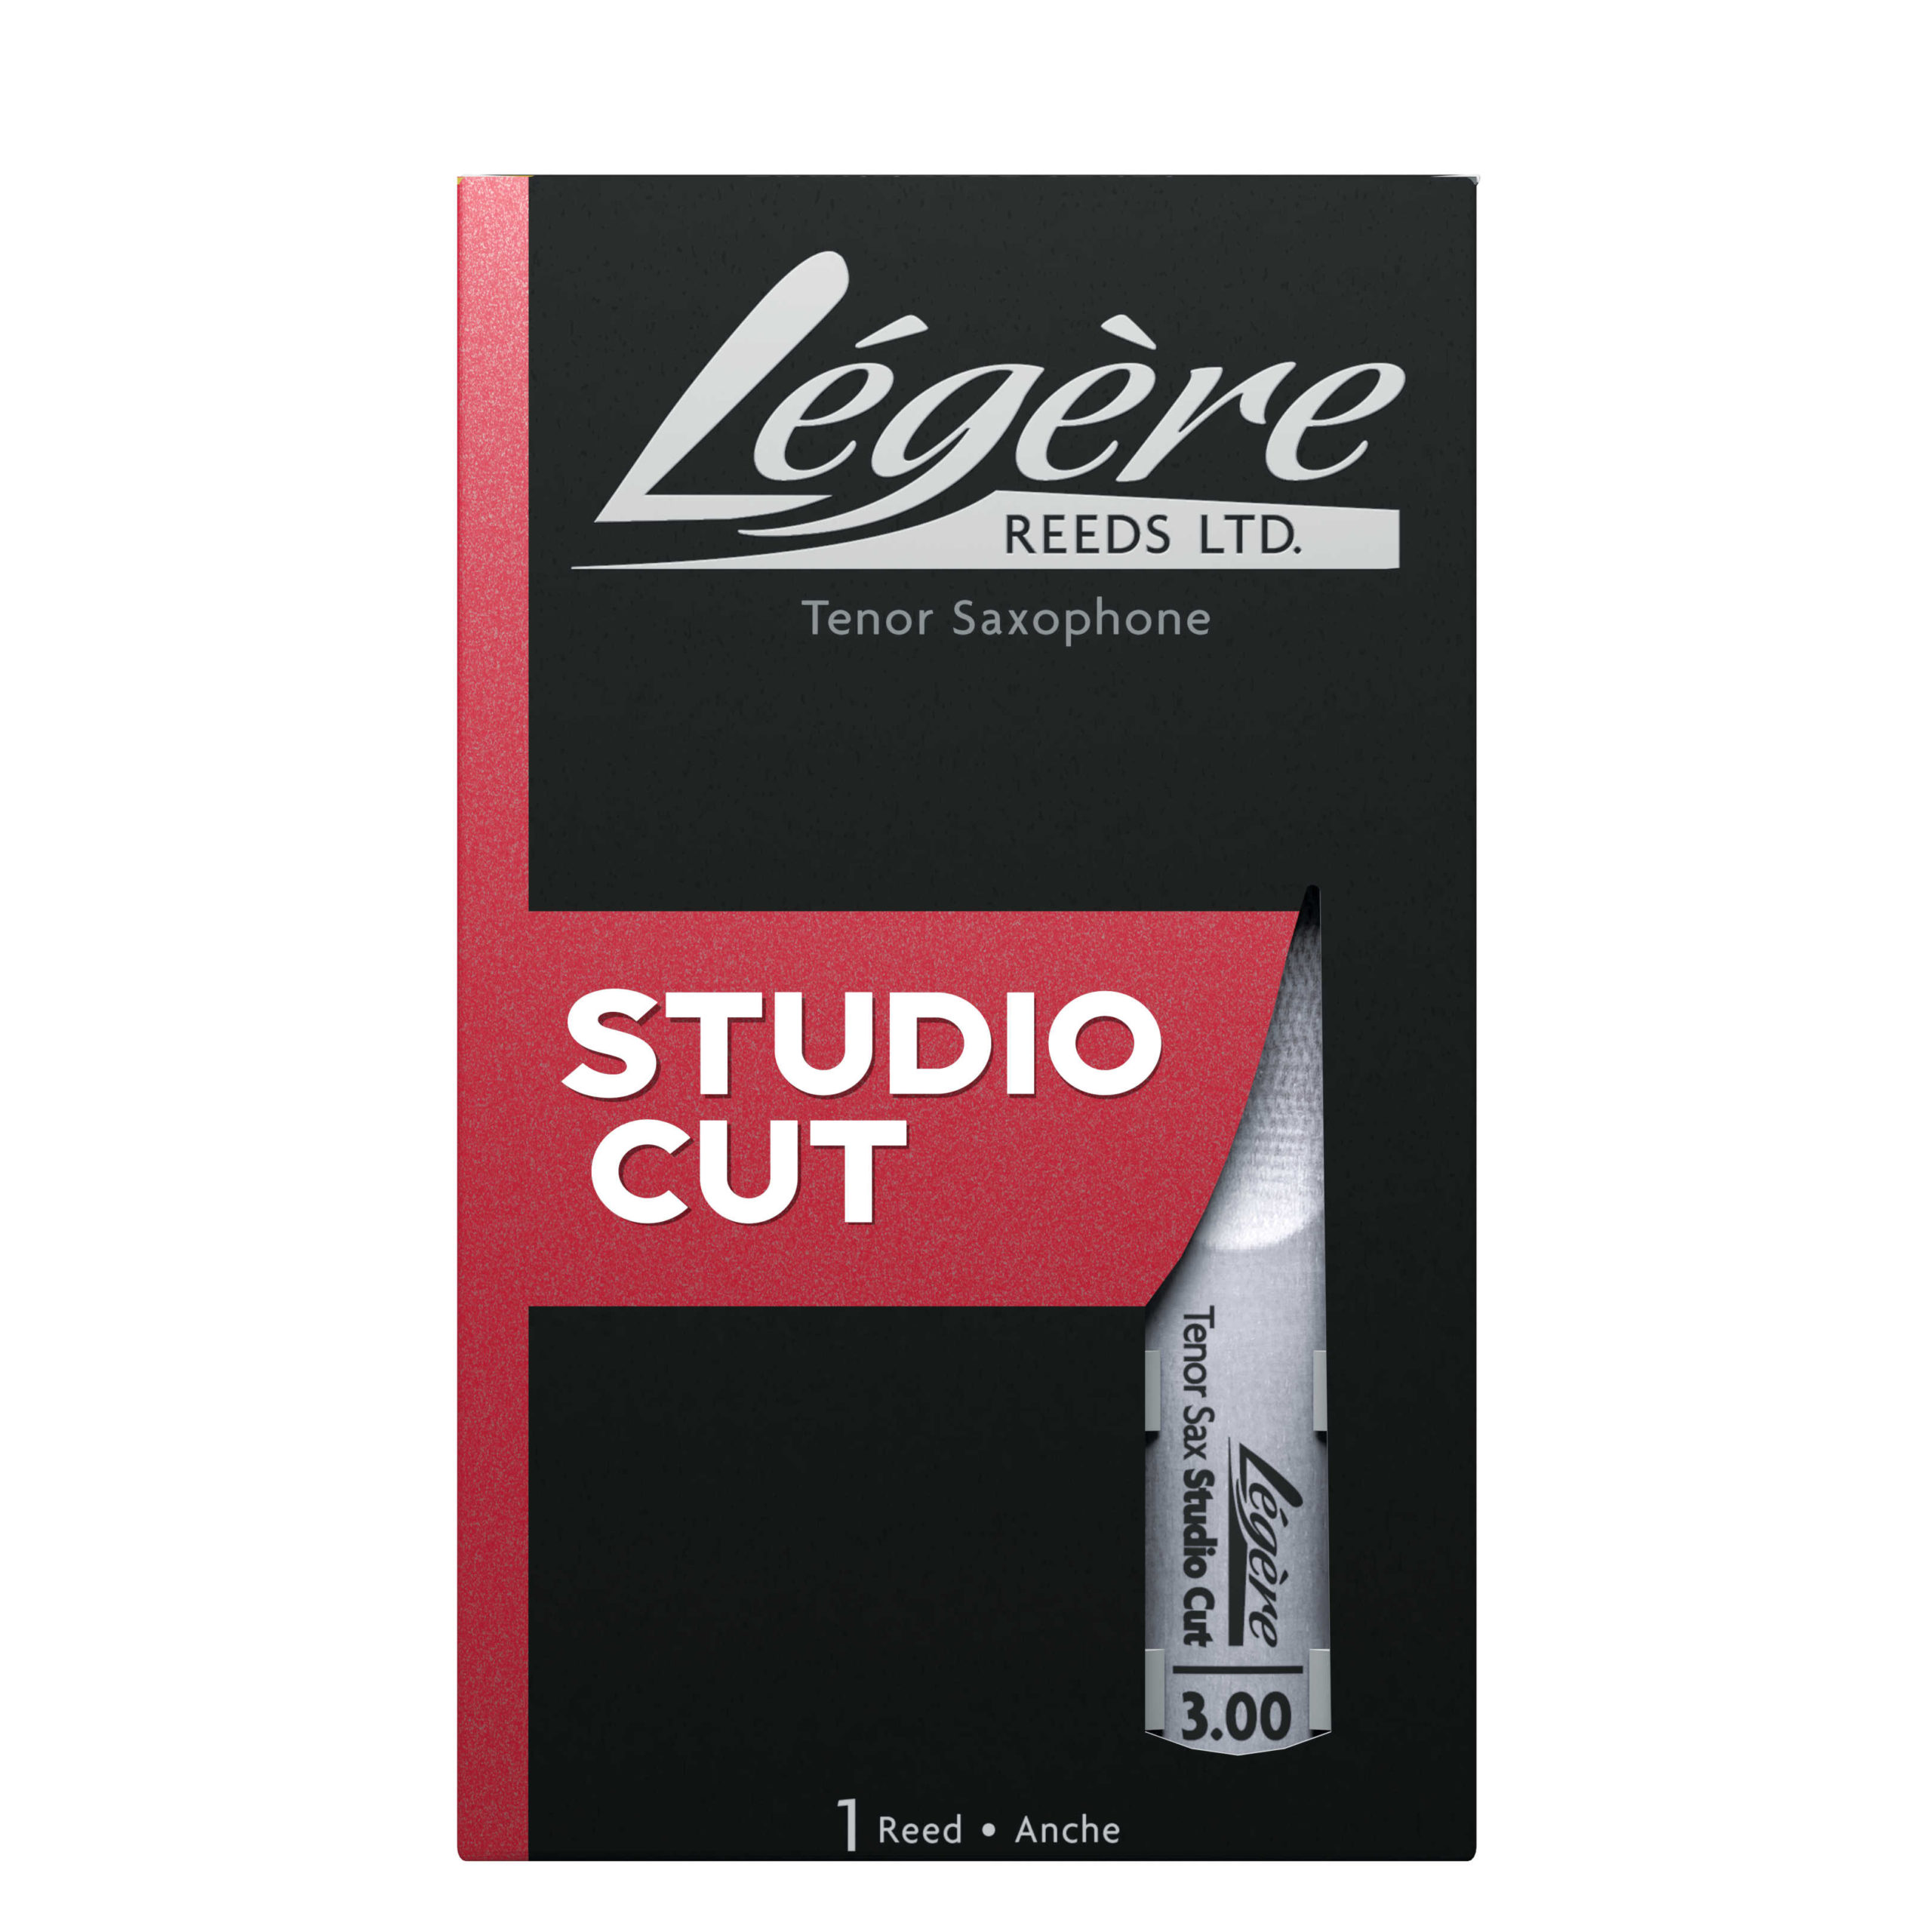 Legere Synthetic Studio Cut Tenor Saxophone Reed (Assorted Strengths)